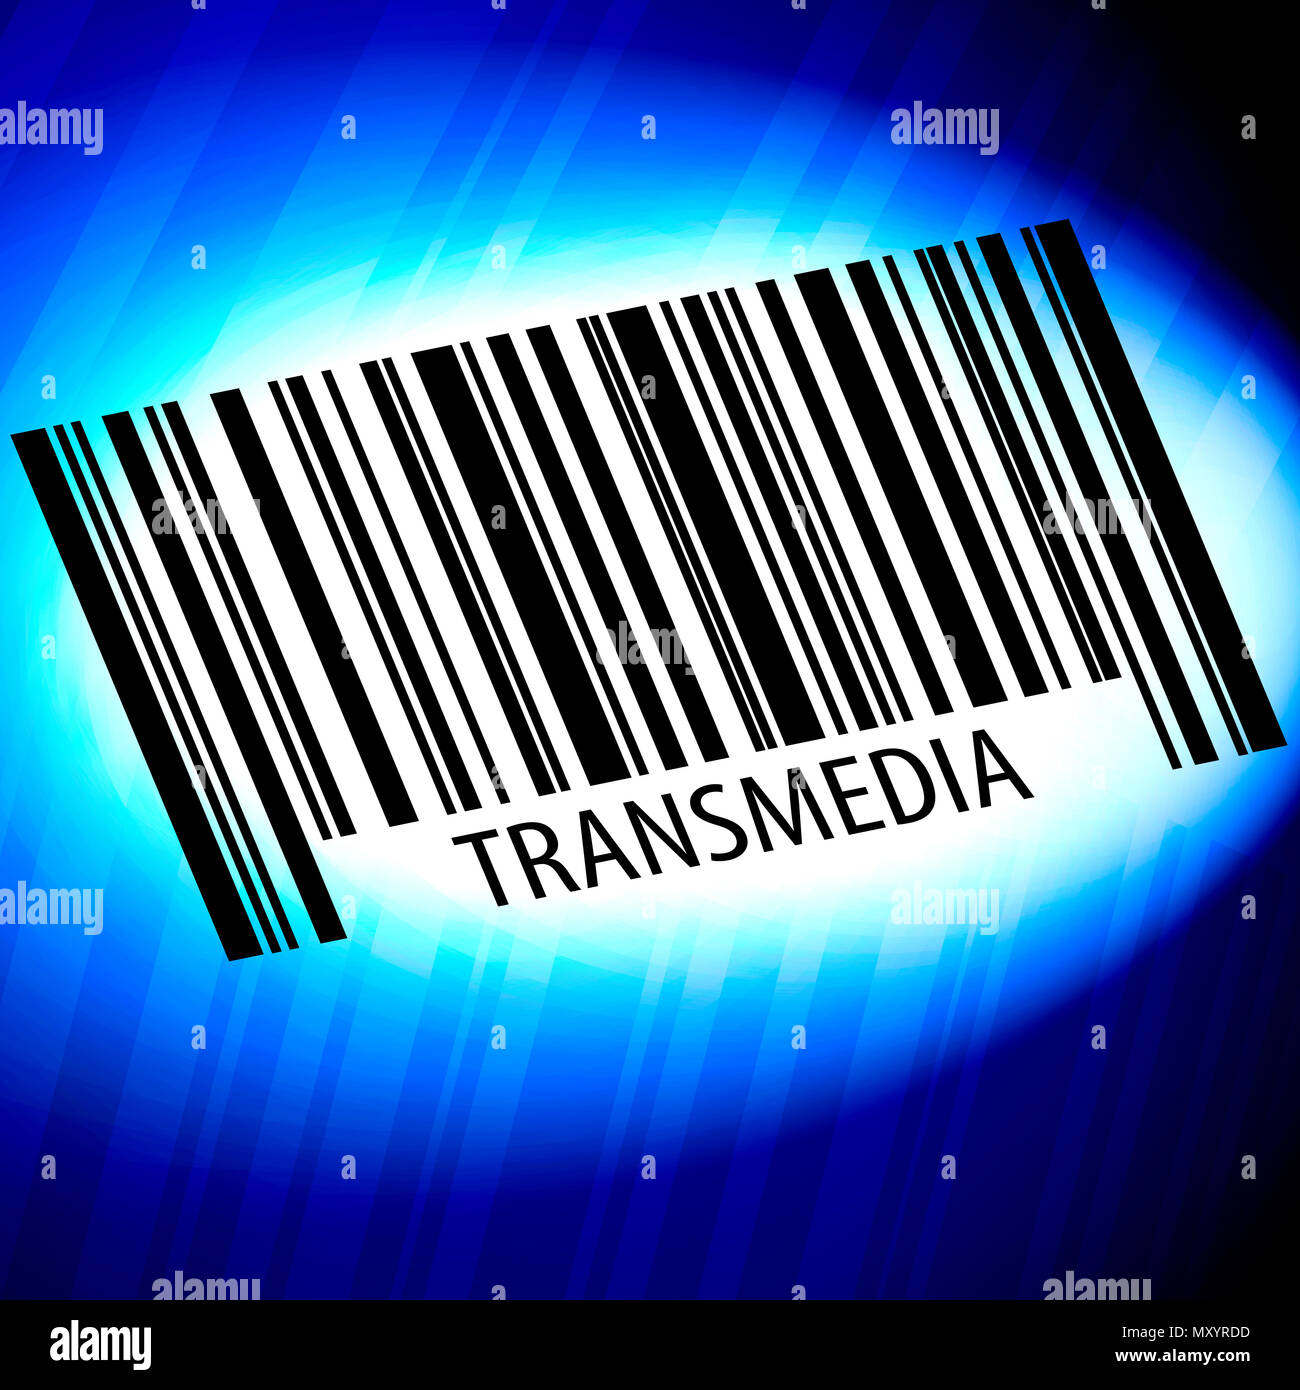 Transmedia - barcode with blue Background Stock Photo